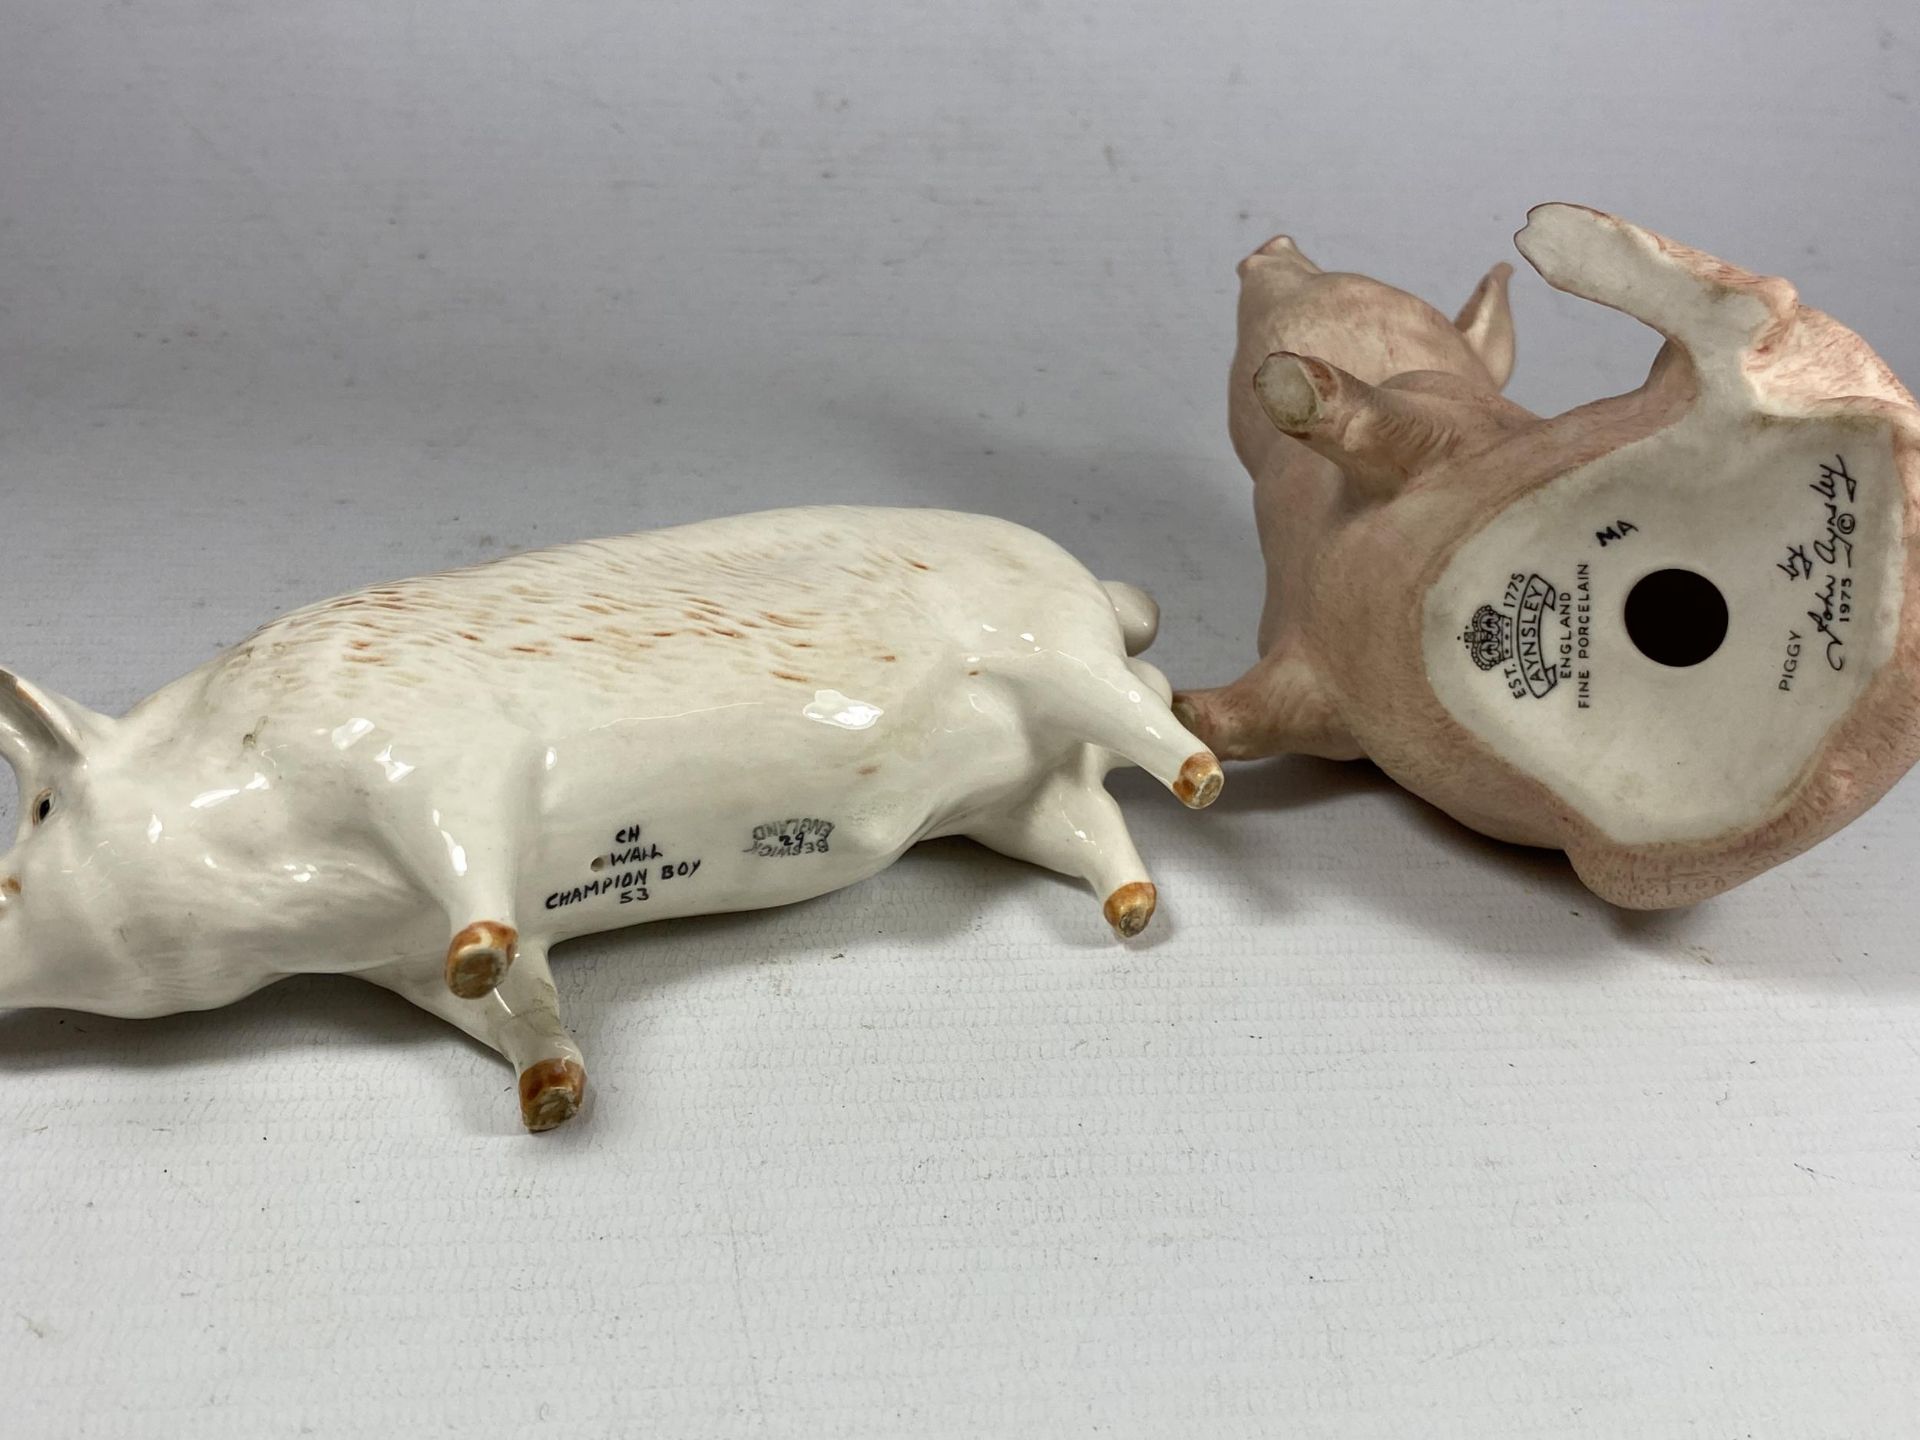 TWO CERAMIC PIGS - A BESWICK CH WALL CHAMPION BOY 53 AND AN AYNSLEY 'PIGGY' (CHIP TO EAR) - Image 4 of 4